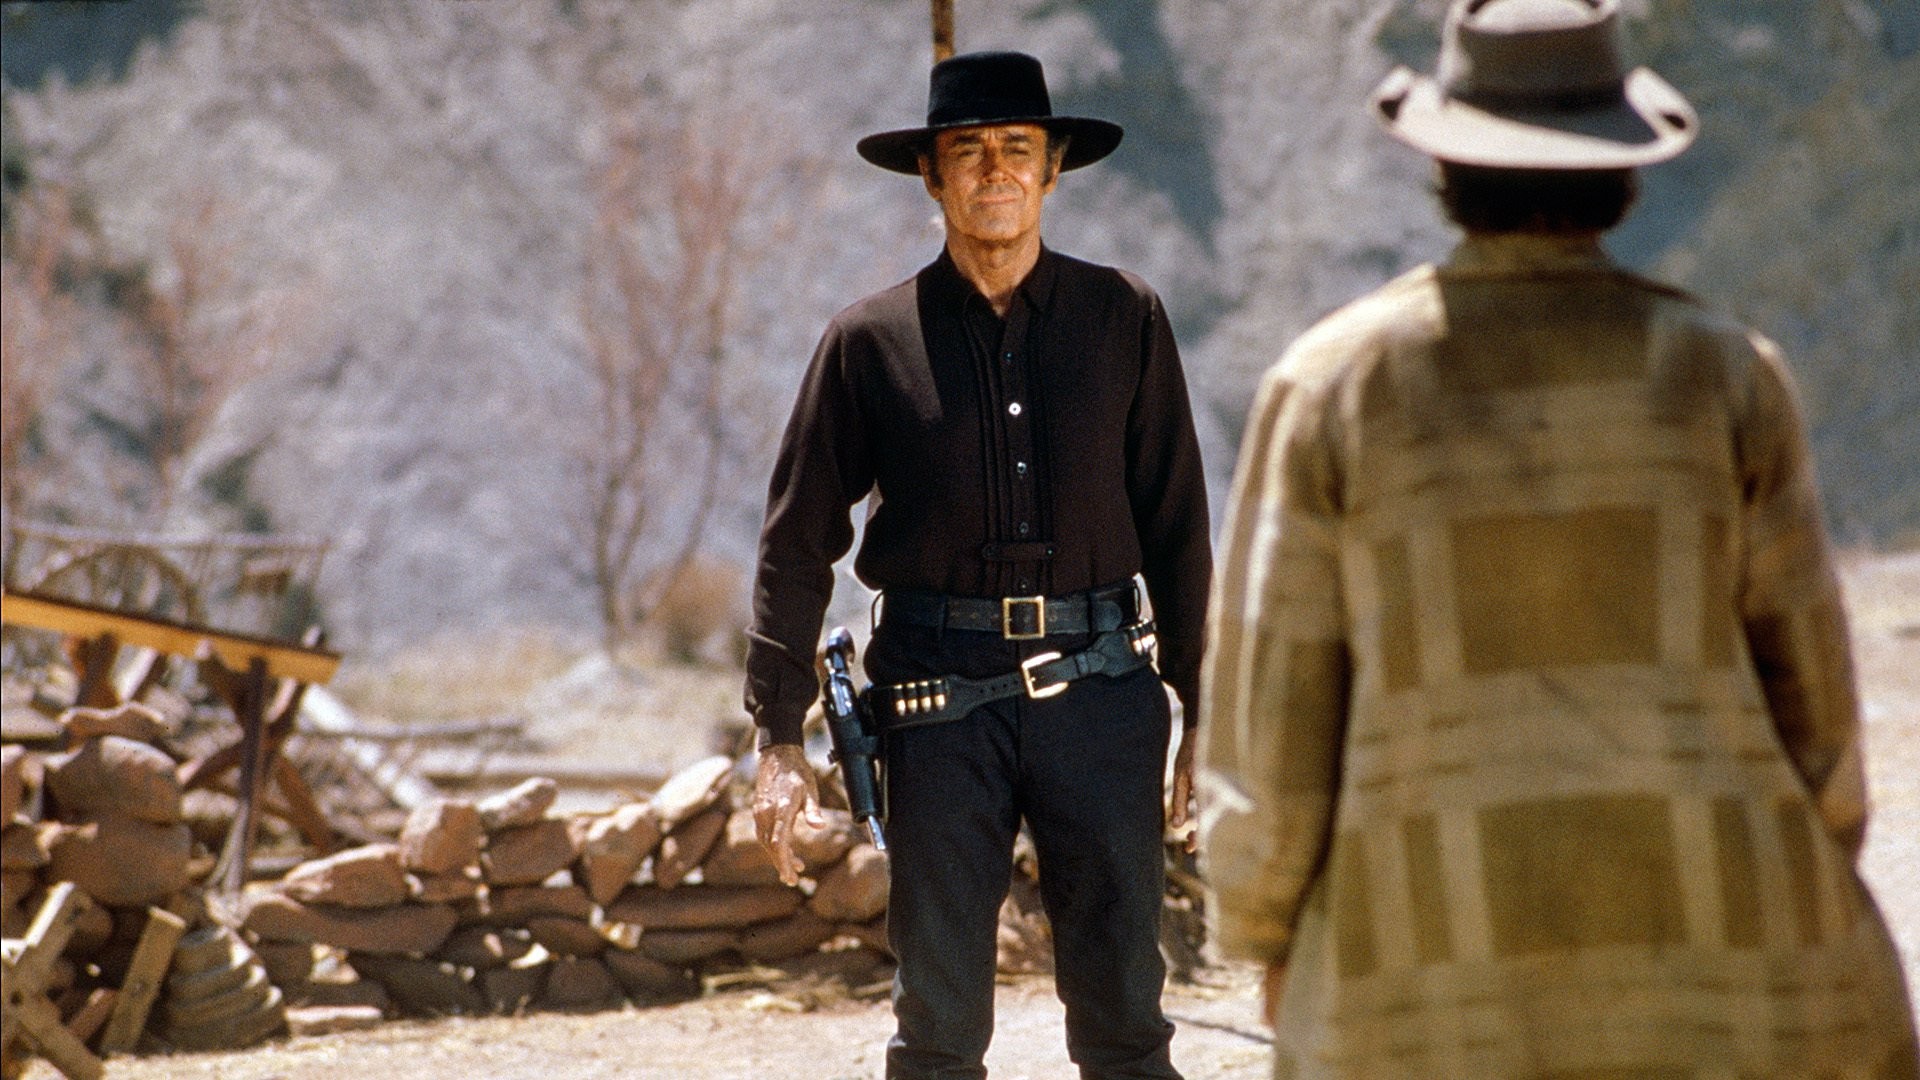 How Once Upon A Time In The West Reflects The Social Anxiety Of 1968